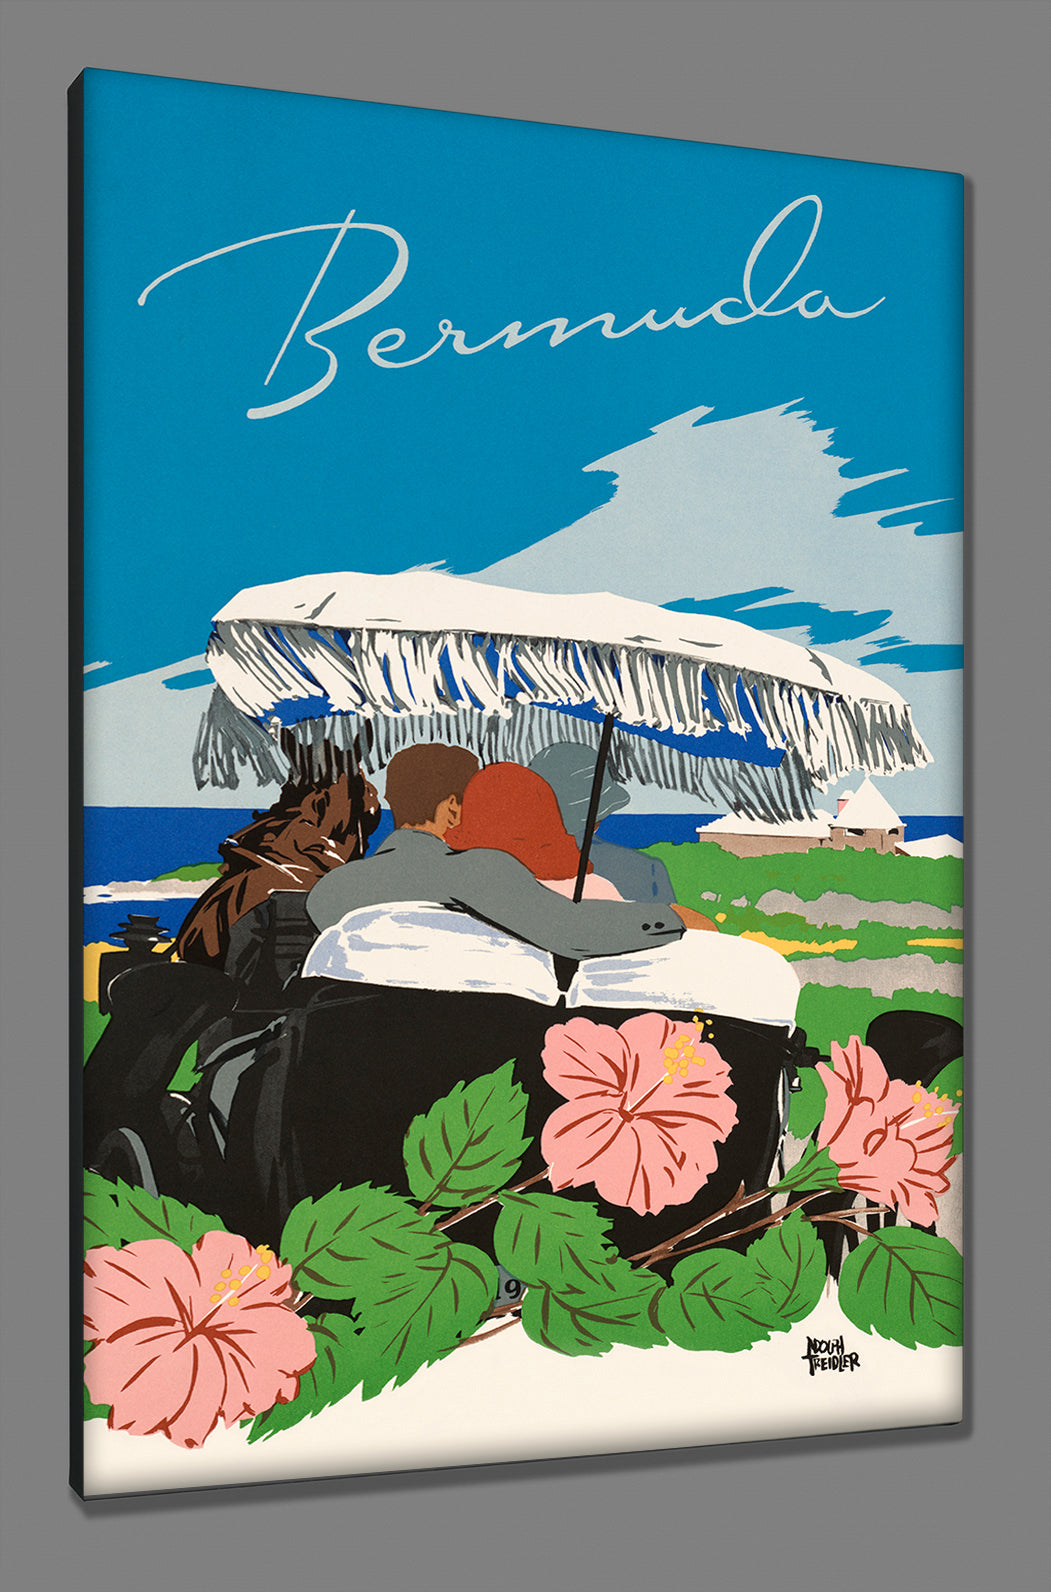 Canvas print mockup of Bermuda travel poster featuring couple in a carriage